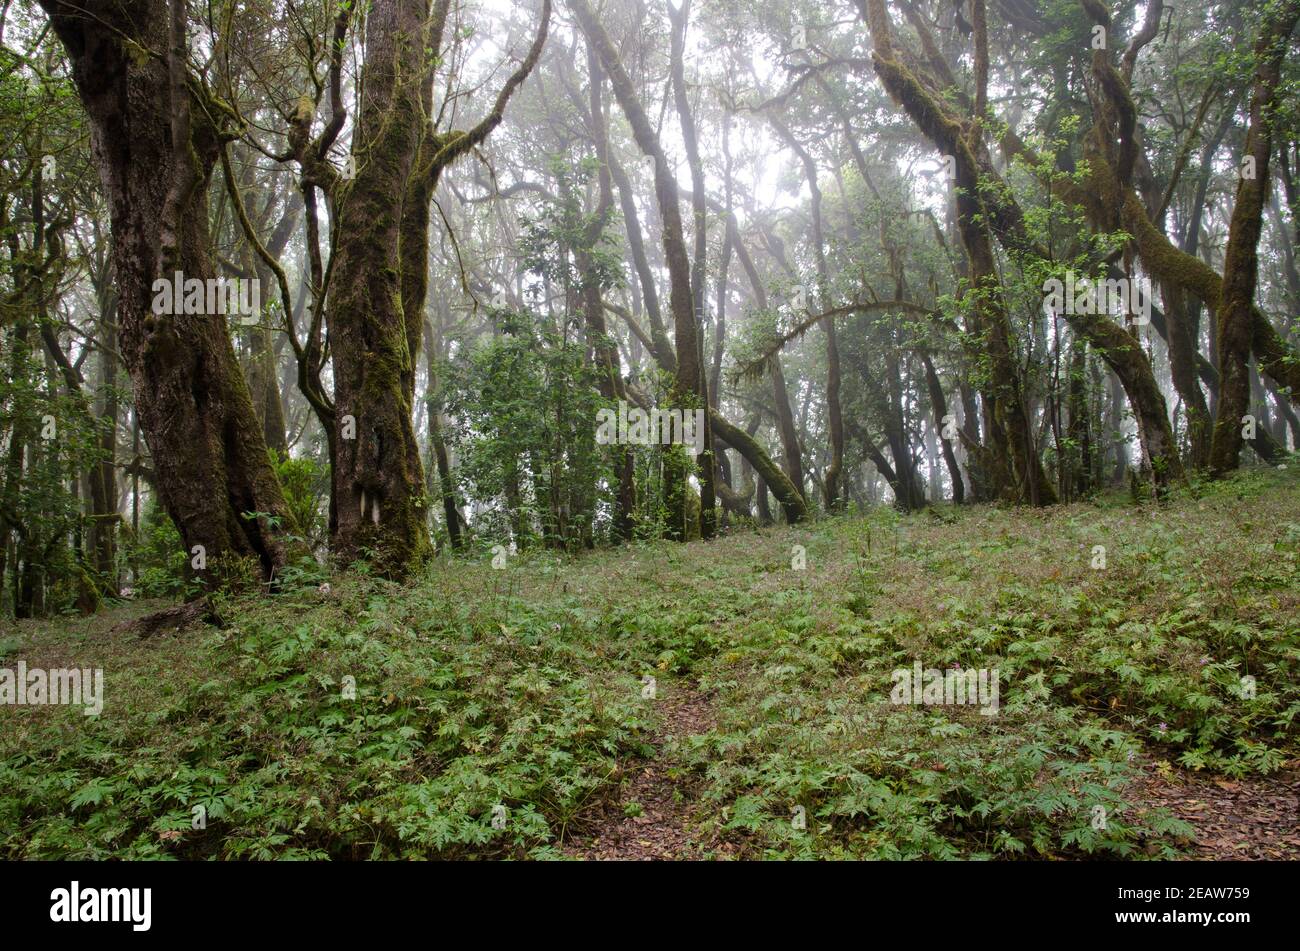 Laurel forest in the Garajonay National Park. Stock Photo